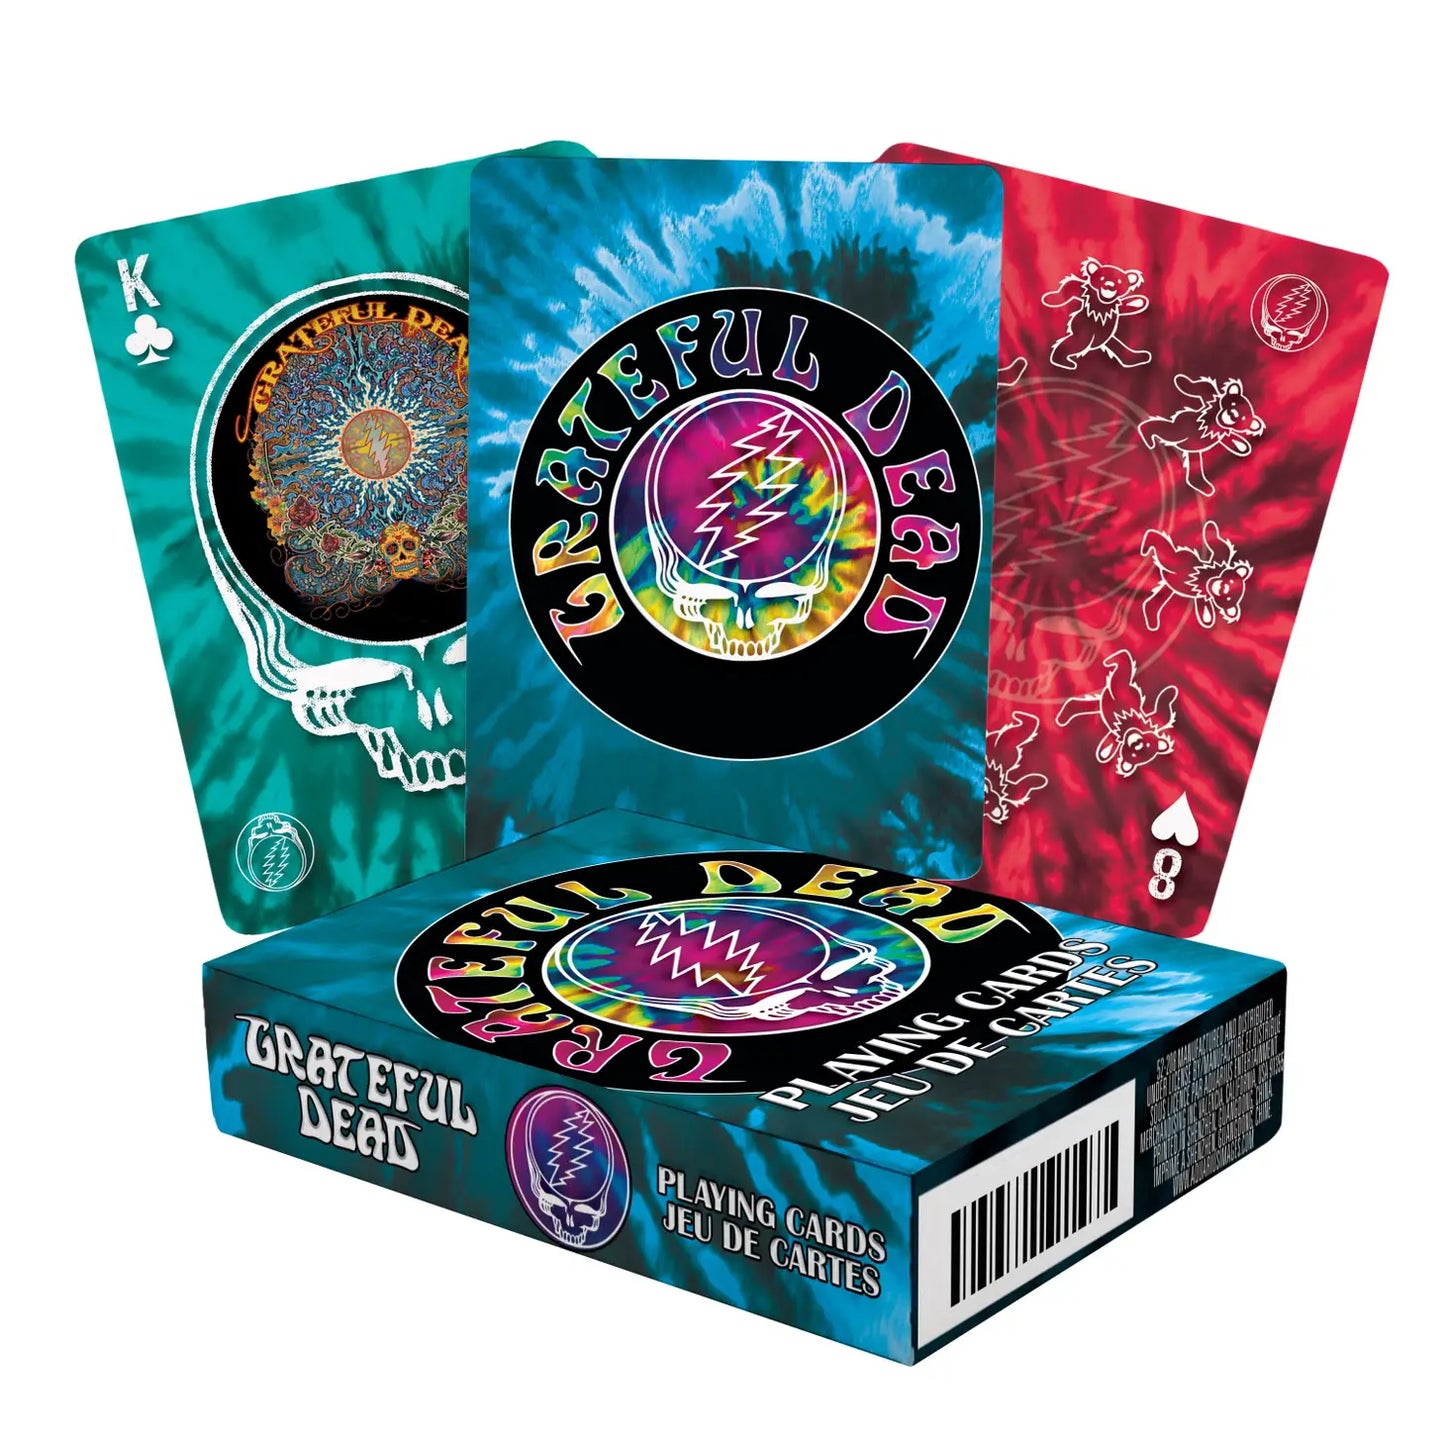 Grateful Dead Playing Cards by Aquarius - A Tribute to the Legendary Band